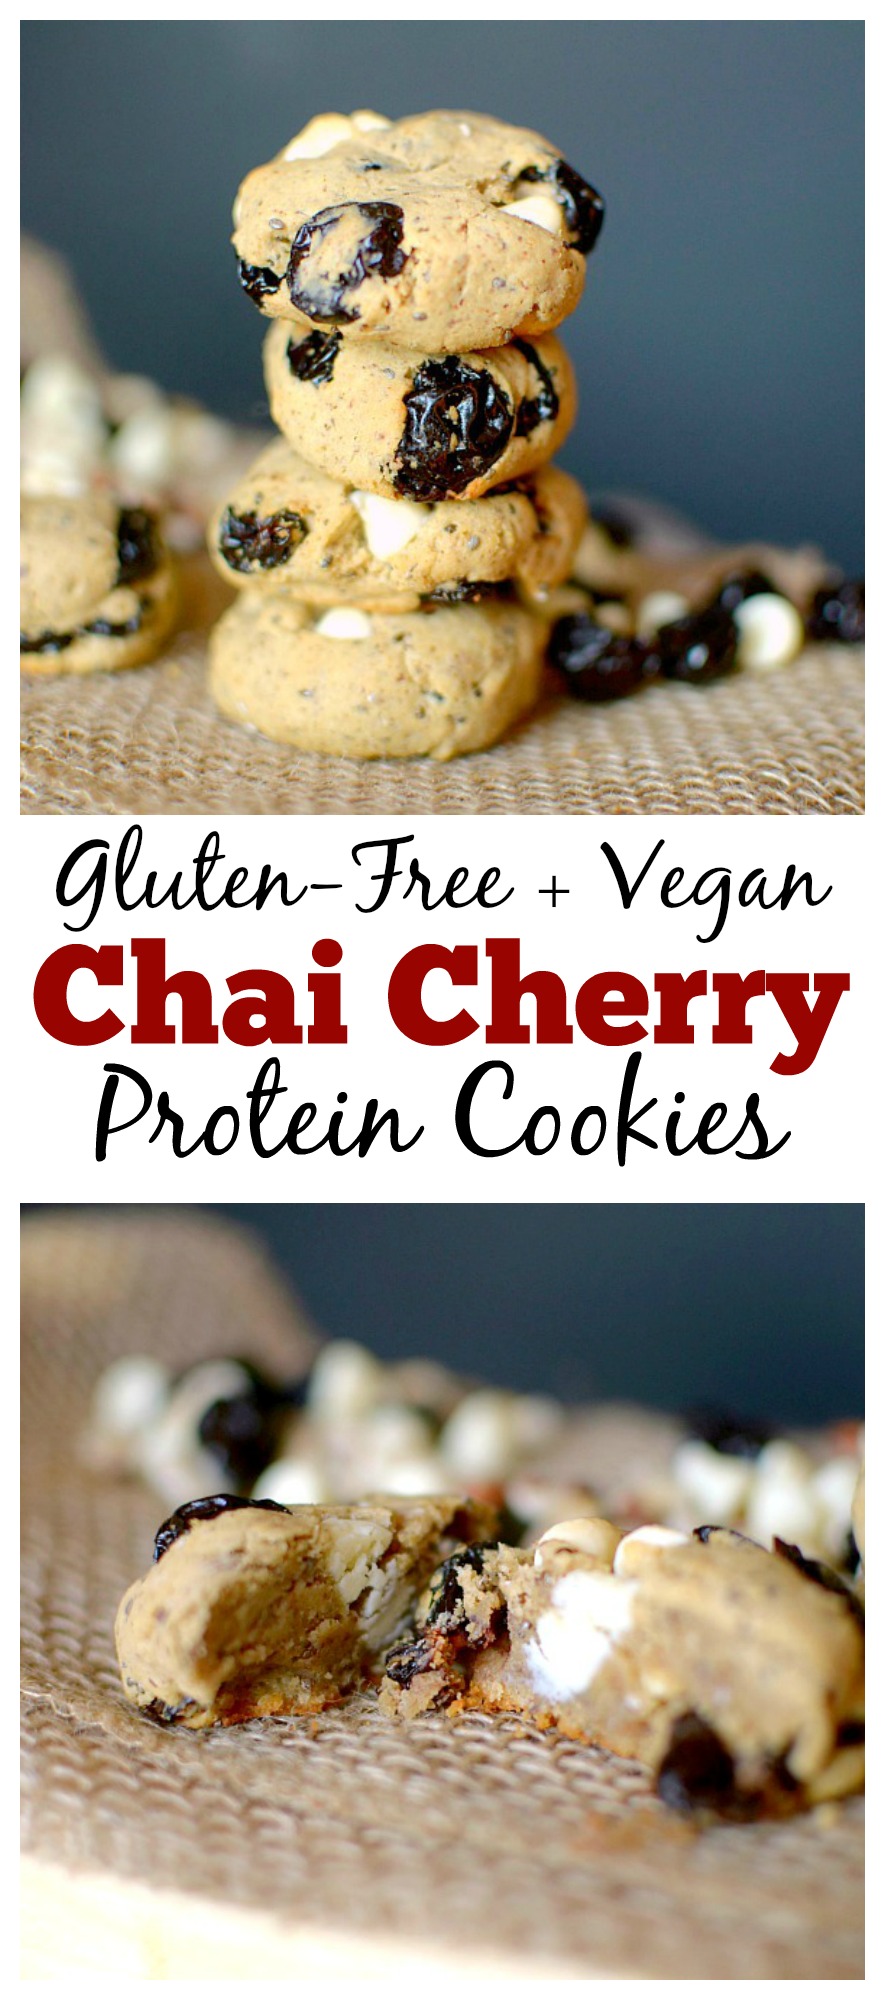 Craving something sweet after a tough workout? Make these Hazelnut Chai Cherry Vegan Protein Cookies! Only six ingredients and less than 20 minutes to make!